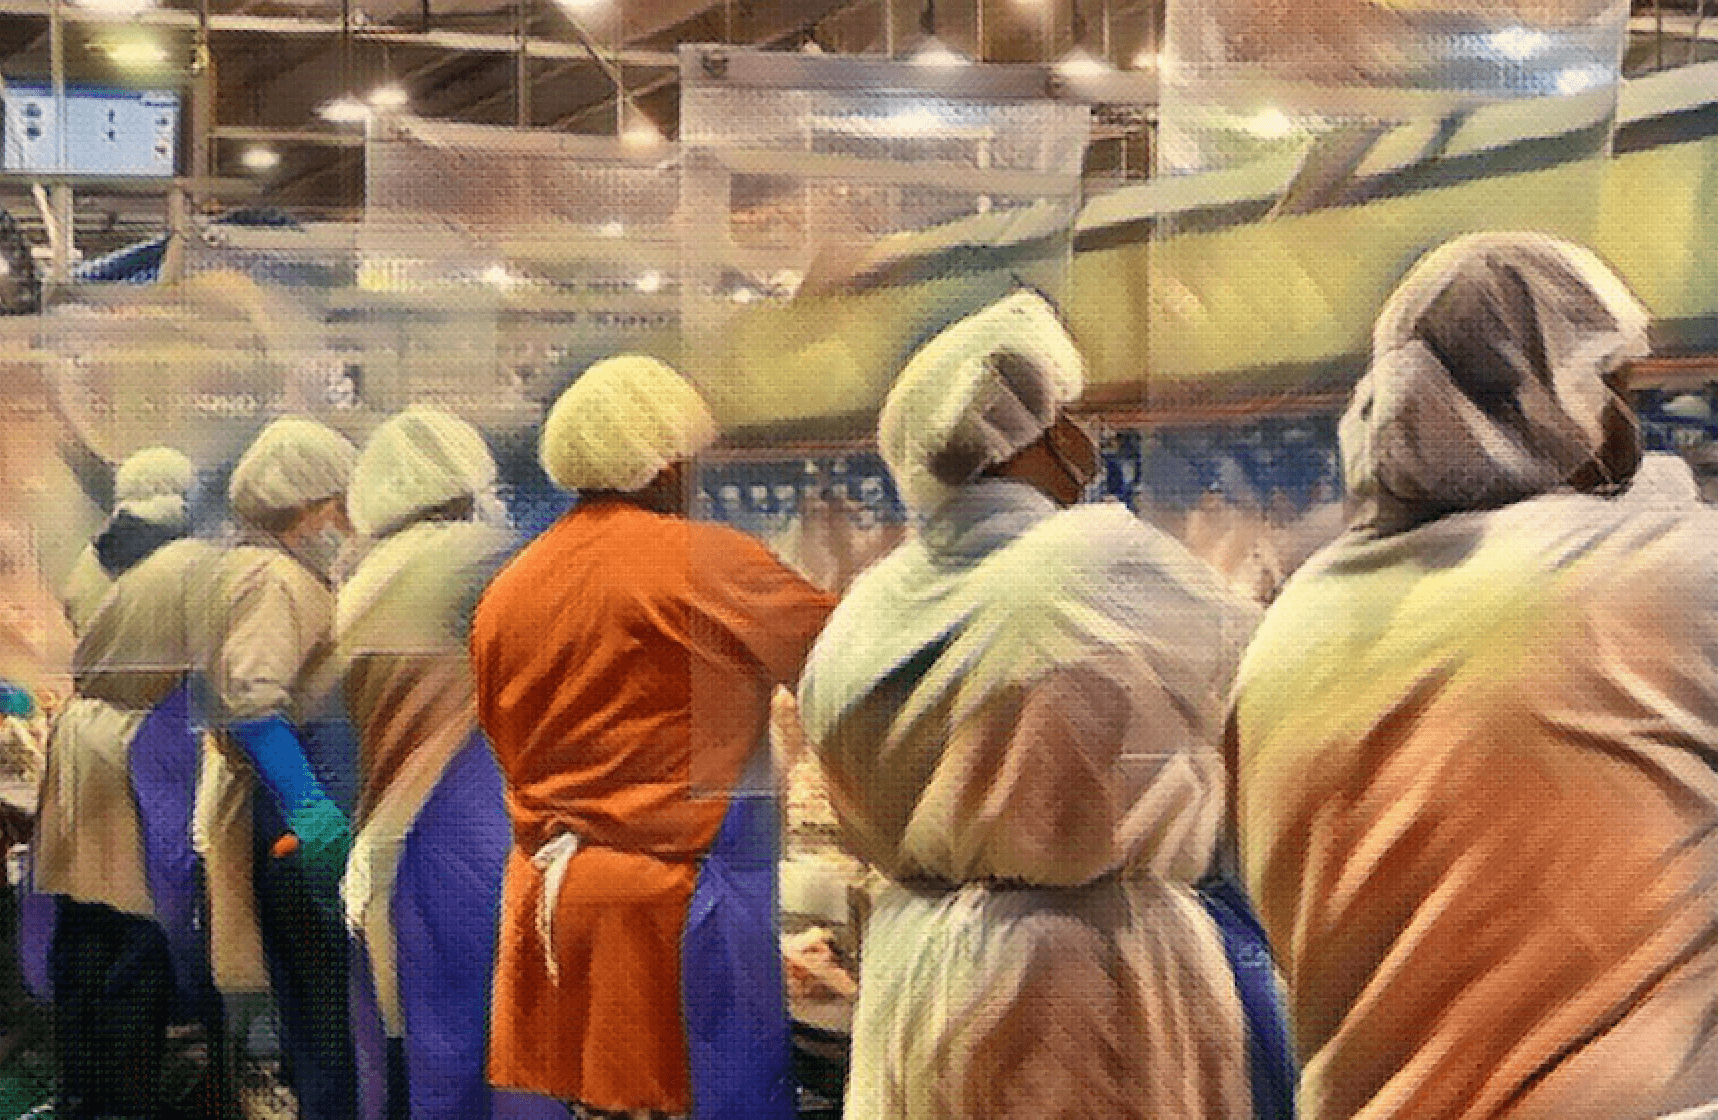 Processing plant workers with image treatment. April 2021